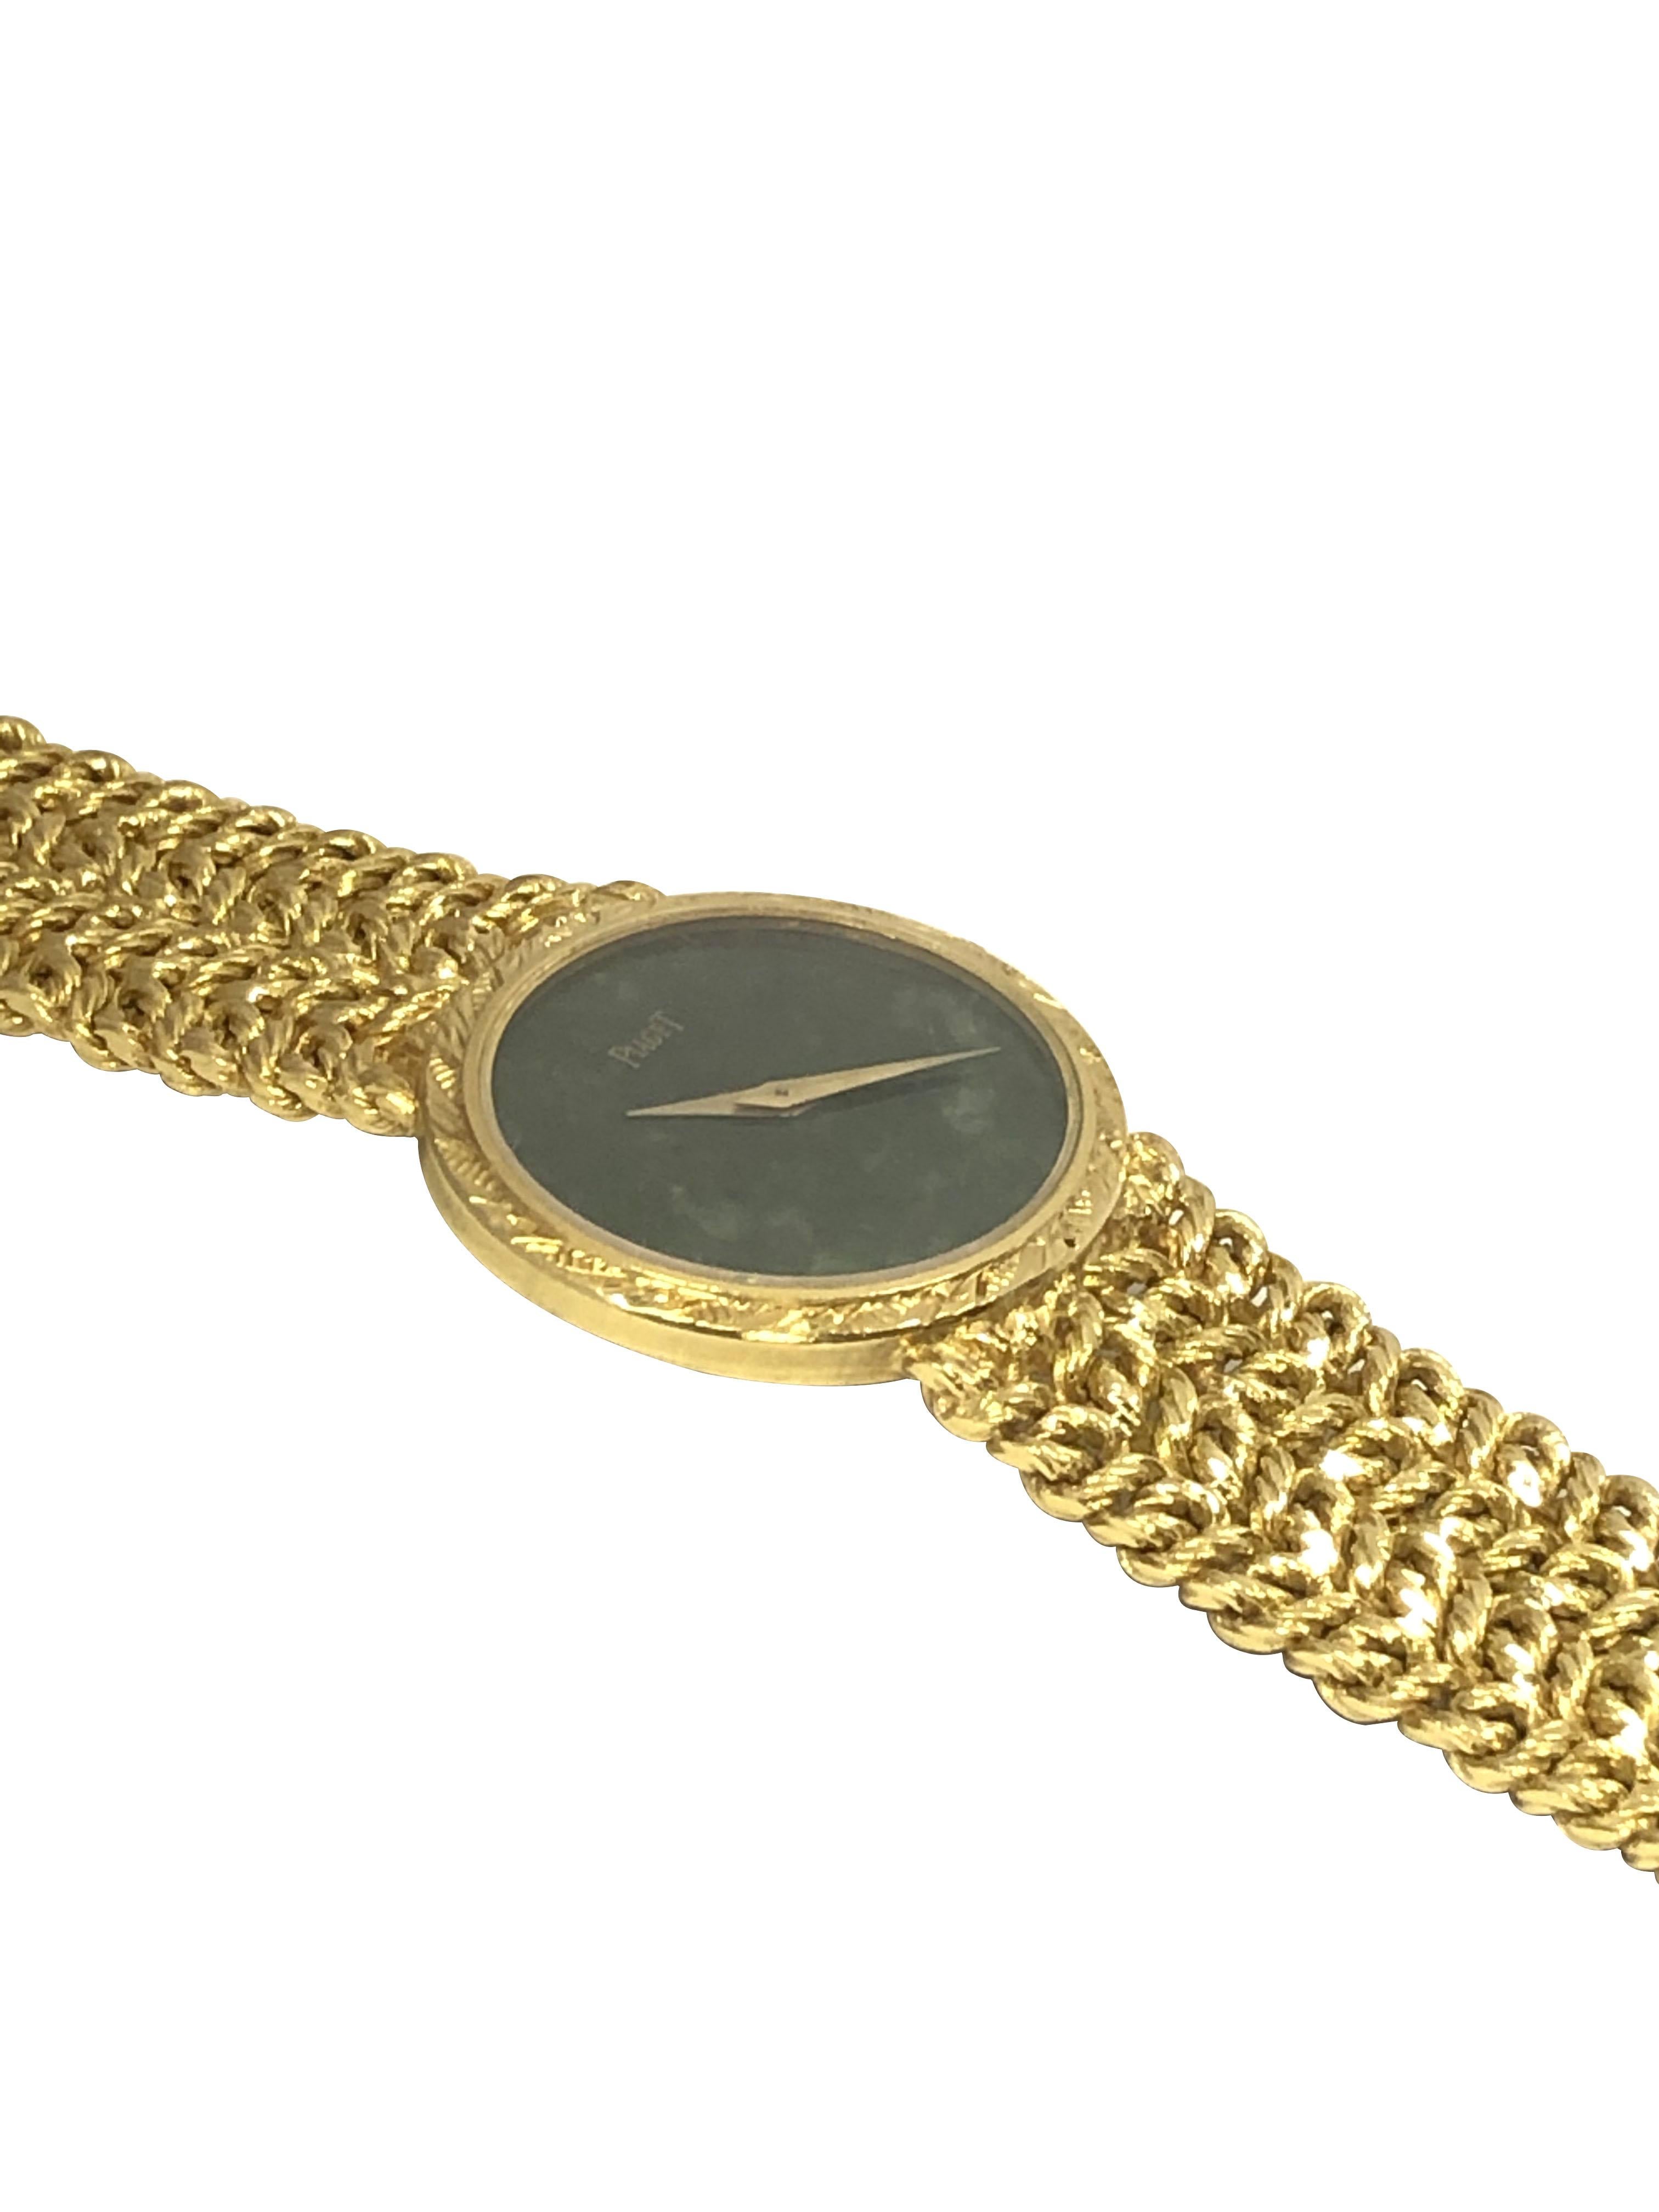 Circa 1970s Piaget ladies Wrist Watch, 27 X 24 M.M. 18k Yellow Gold 2 piece case, Mechanical, Manual wind 17 Jewel Movement, Nephrite Dial with Gold Hands. 5/8 inch wide soft link bracelet with Piaget Logo clasp. watch length 7 1/2 inches. Comes in